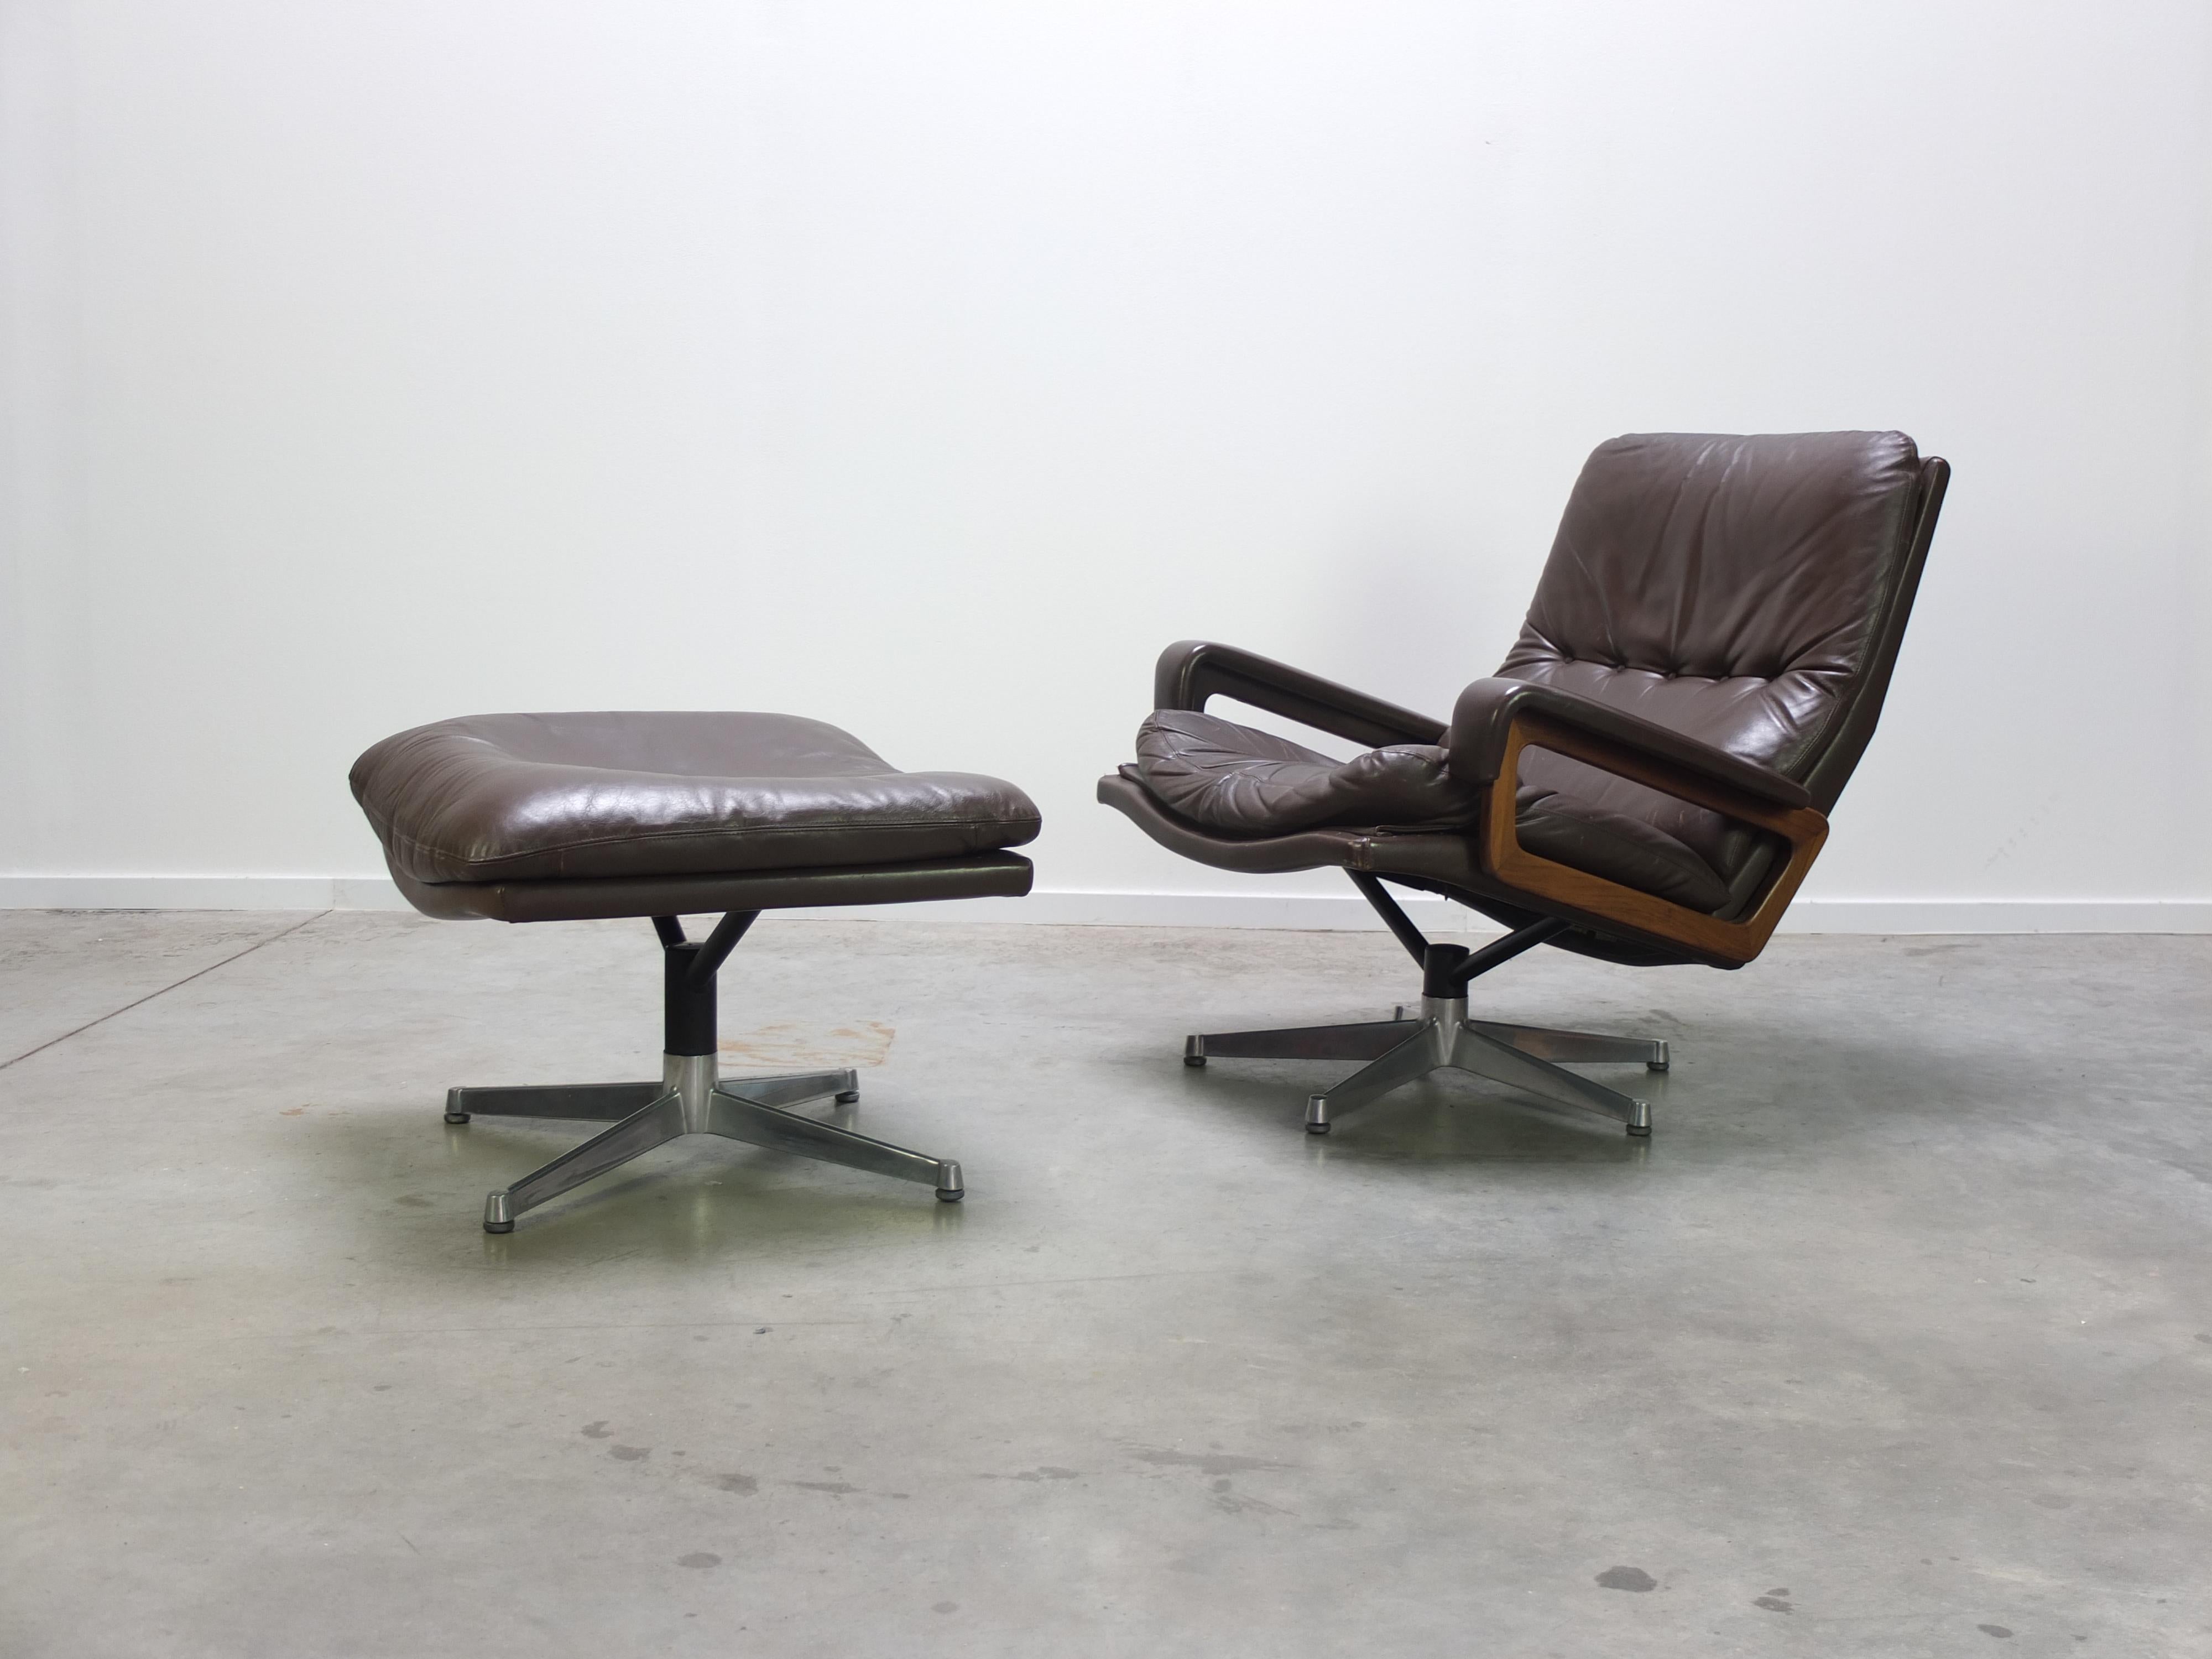 Iconic ‘King’ lounge chair designed by Swiss architect André Vandenbeuck for Strässle during the 1960s. This is a dark brown leather edition with rosewood armrests and the early star-shaped metal base. It also comes with its original matching